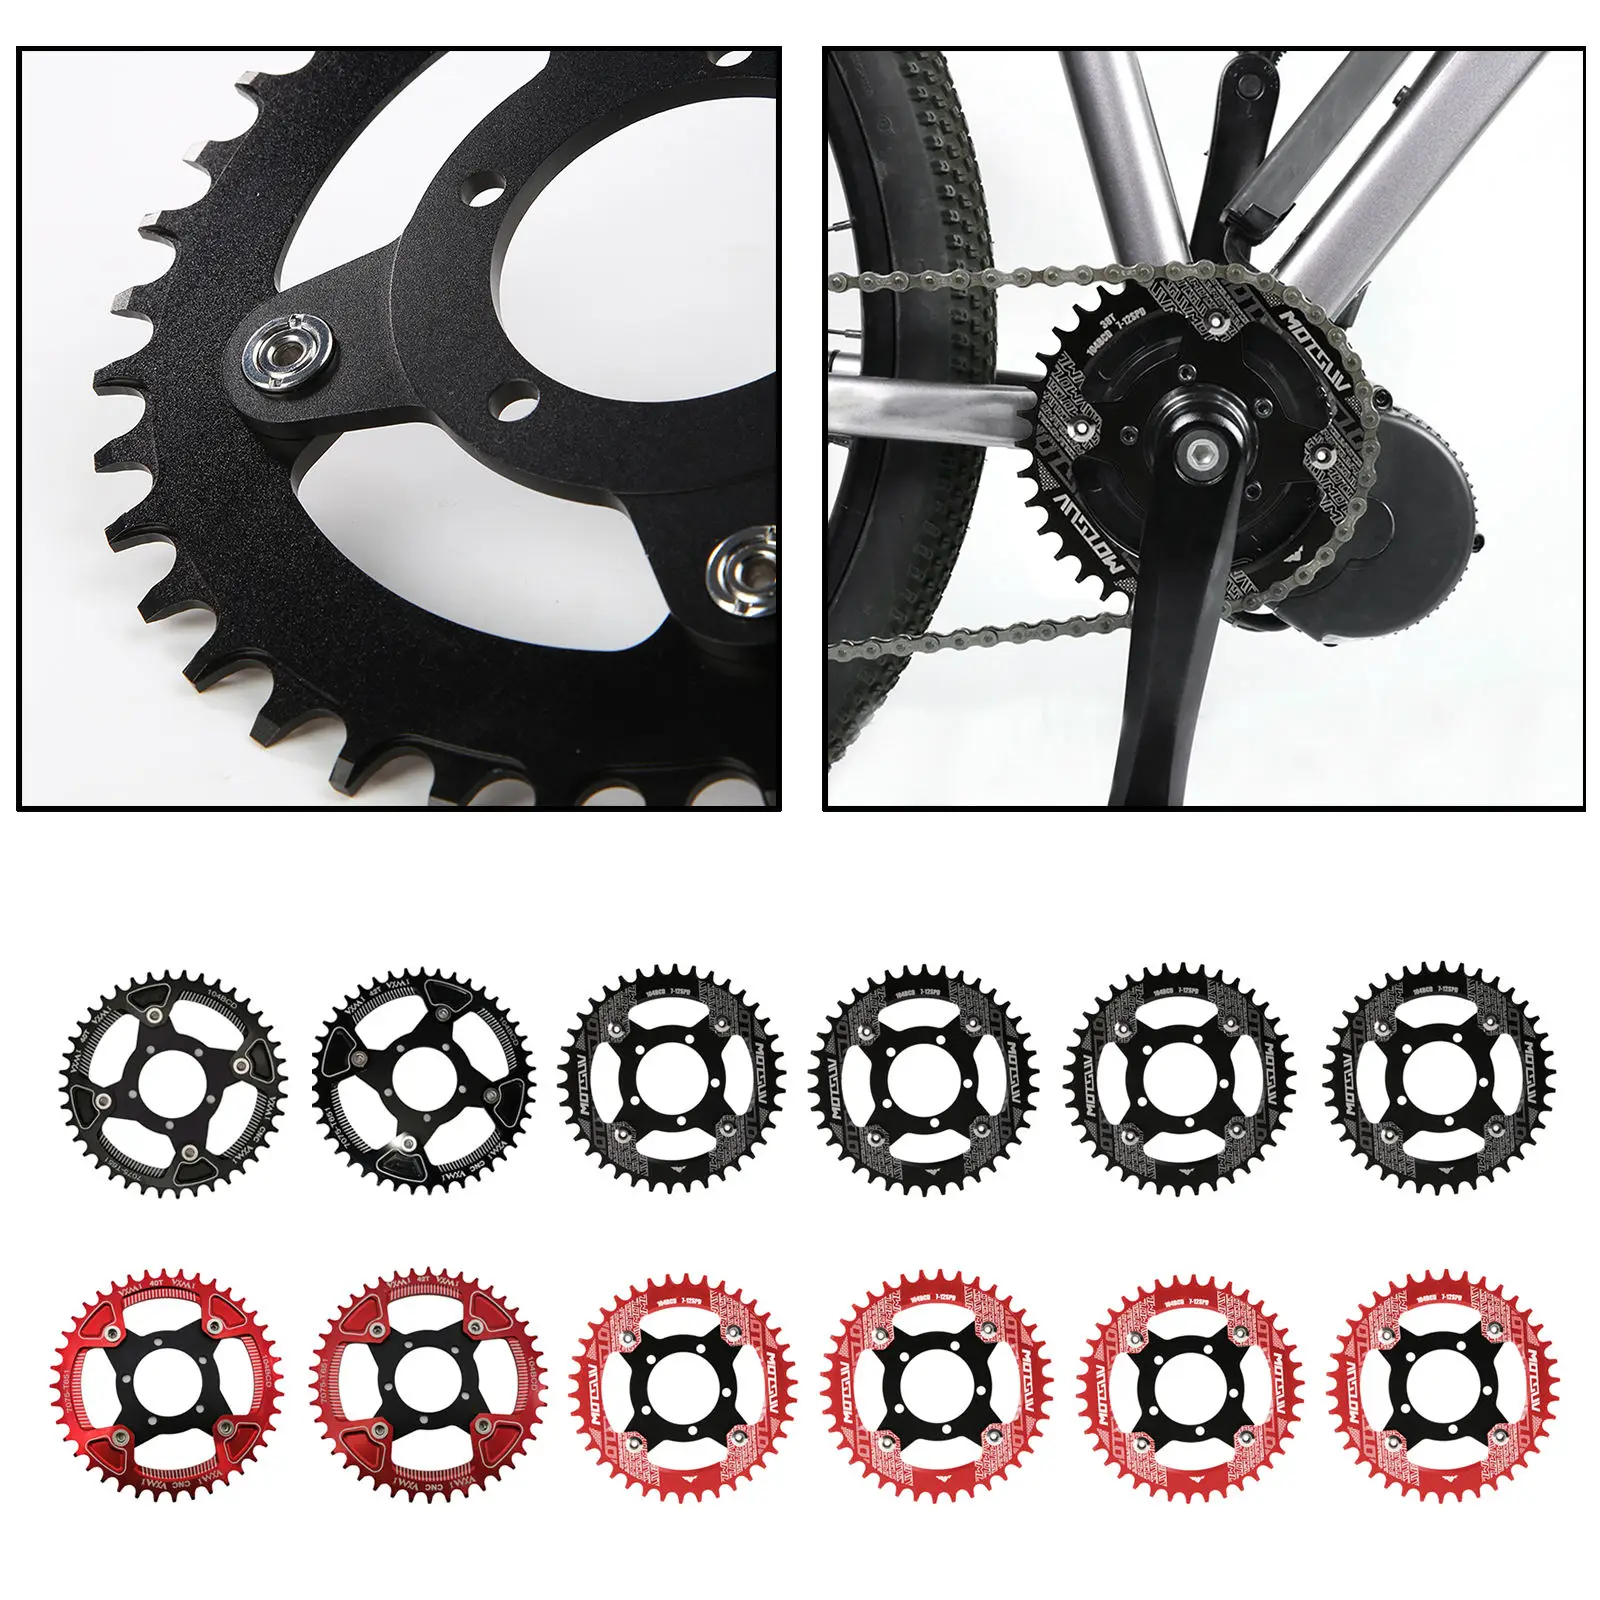 104BCD E-bike Chainring + Adapter For Bafang Mid Drive Motor Electric Bicycle Aluminium Alloy 32T 34T 36T 38T 40T 42T